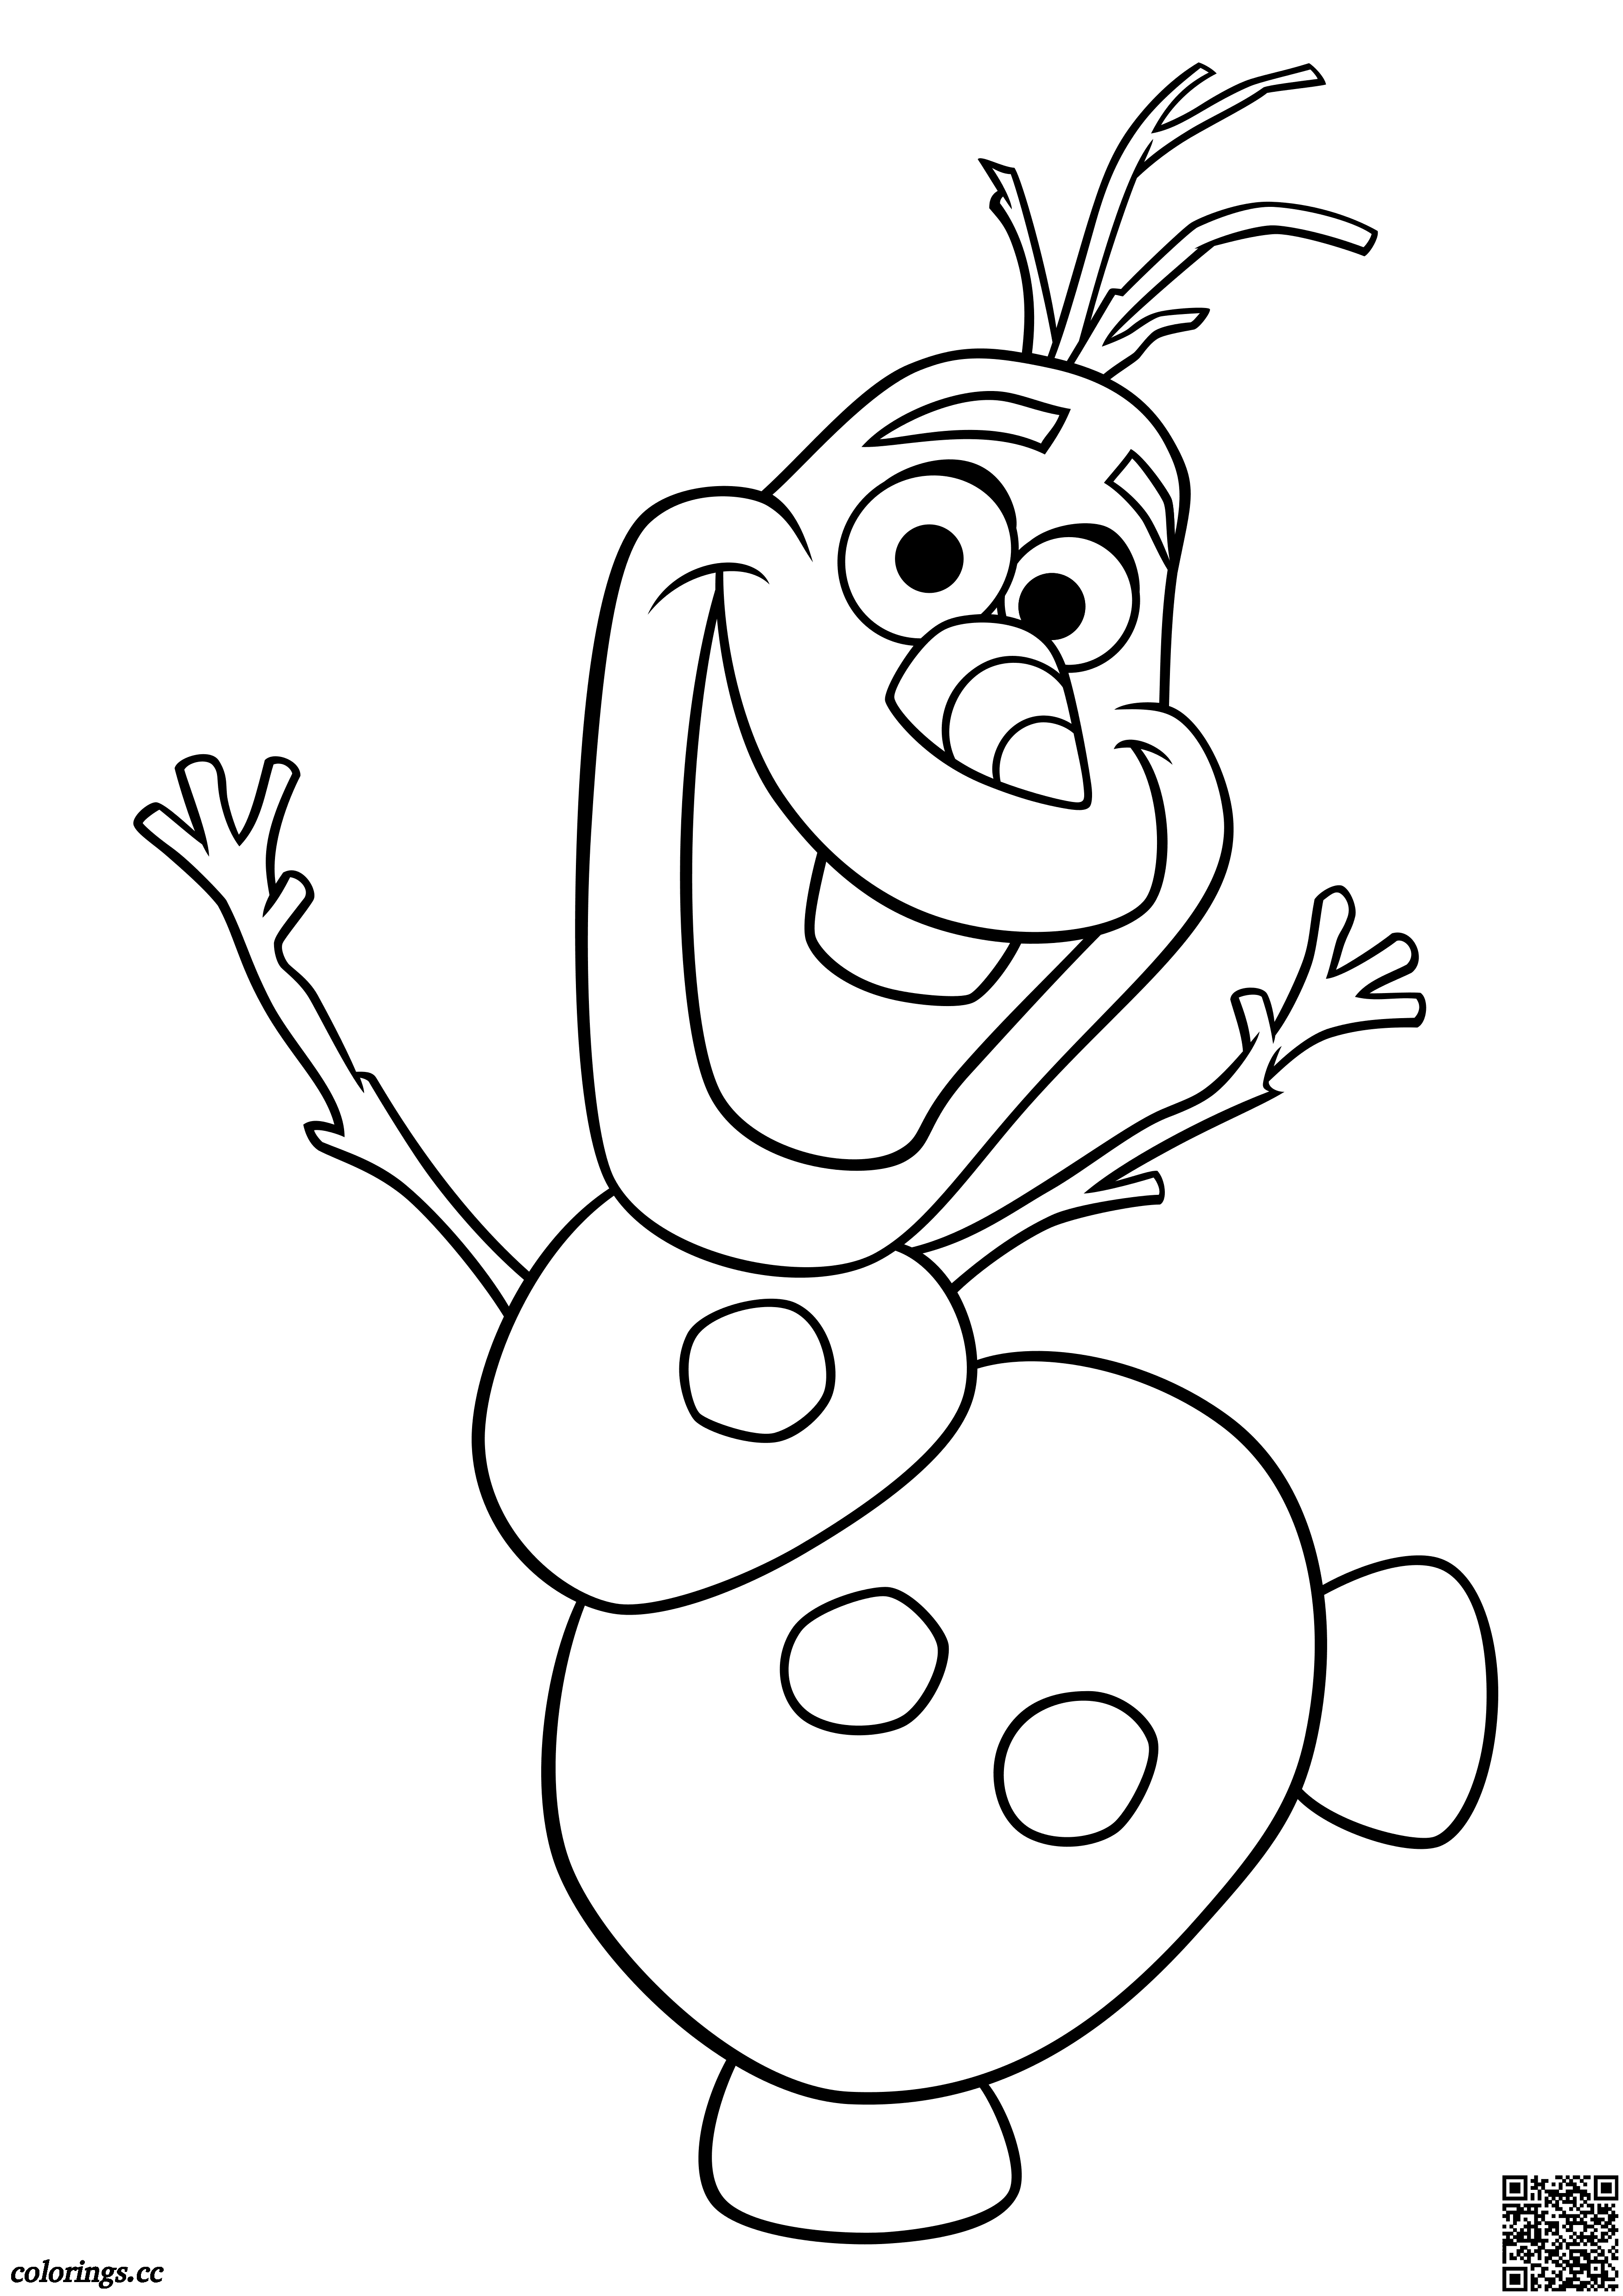 Olaf coloring pages, Cold heart coloring pages   Colorings.cc